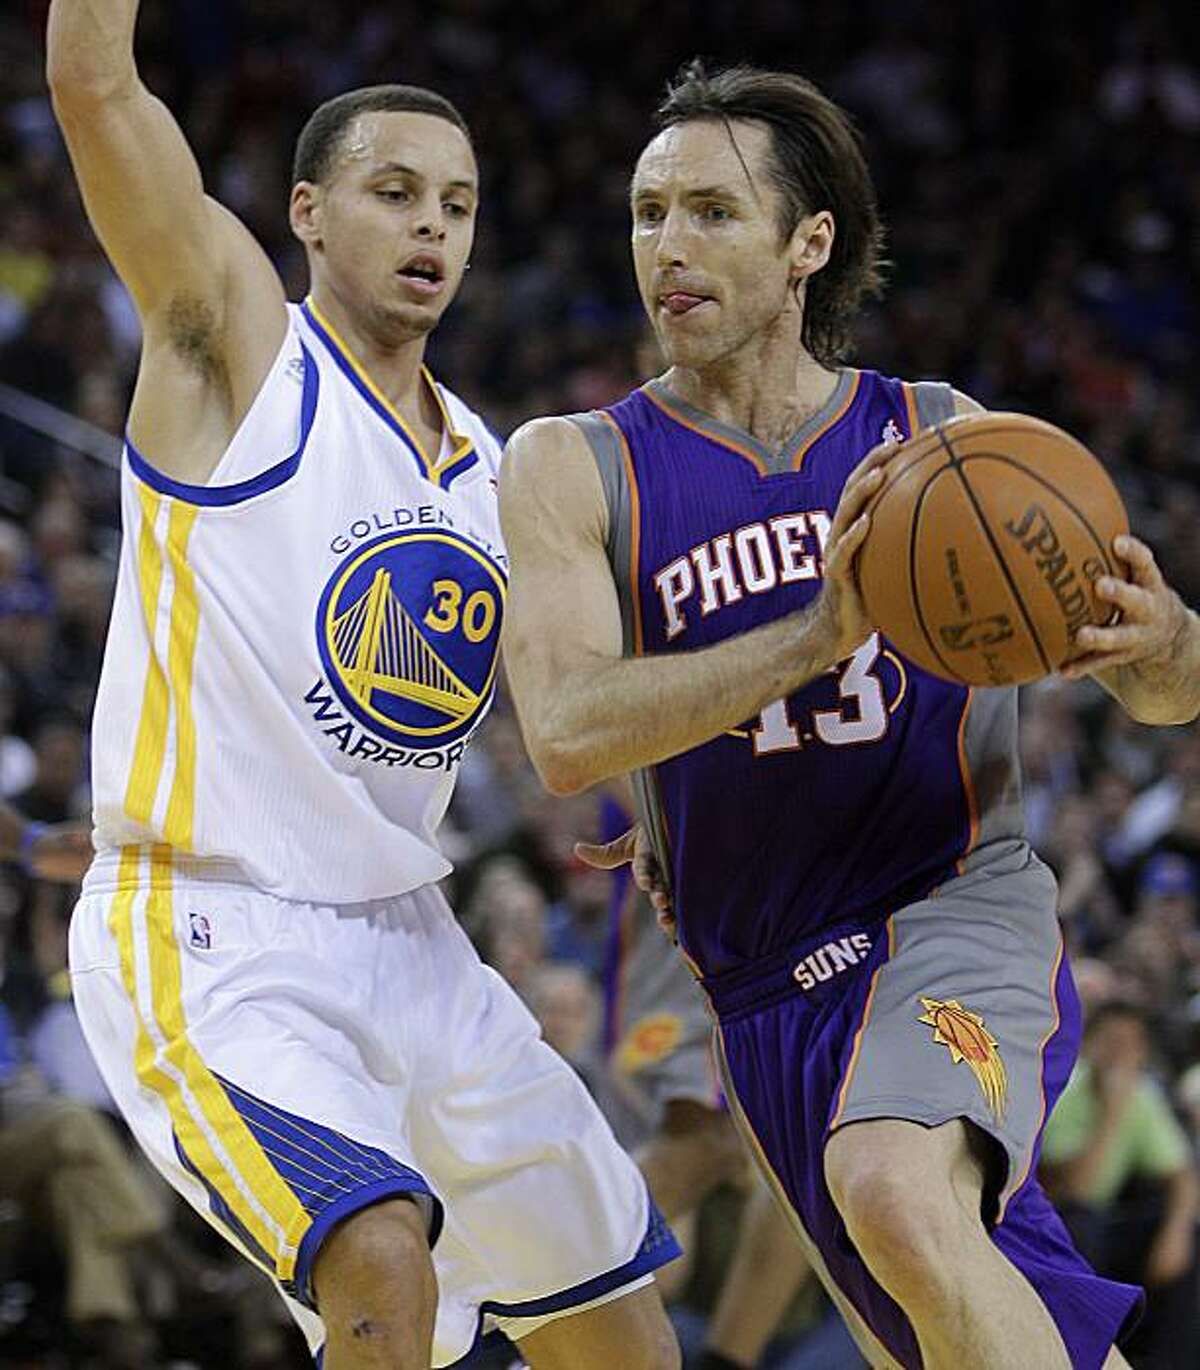 Phoenix Suns' Steve Nash, right, drives to the basket as Golden State Warriors' Stephen Curry defends during the first half of an NBA basketball game Monday, Feb. 7, 2011, in Oakland, Calif.